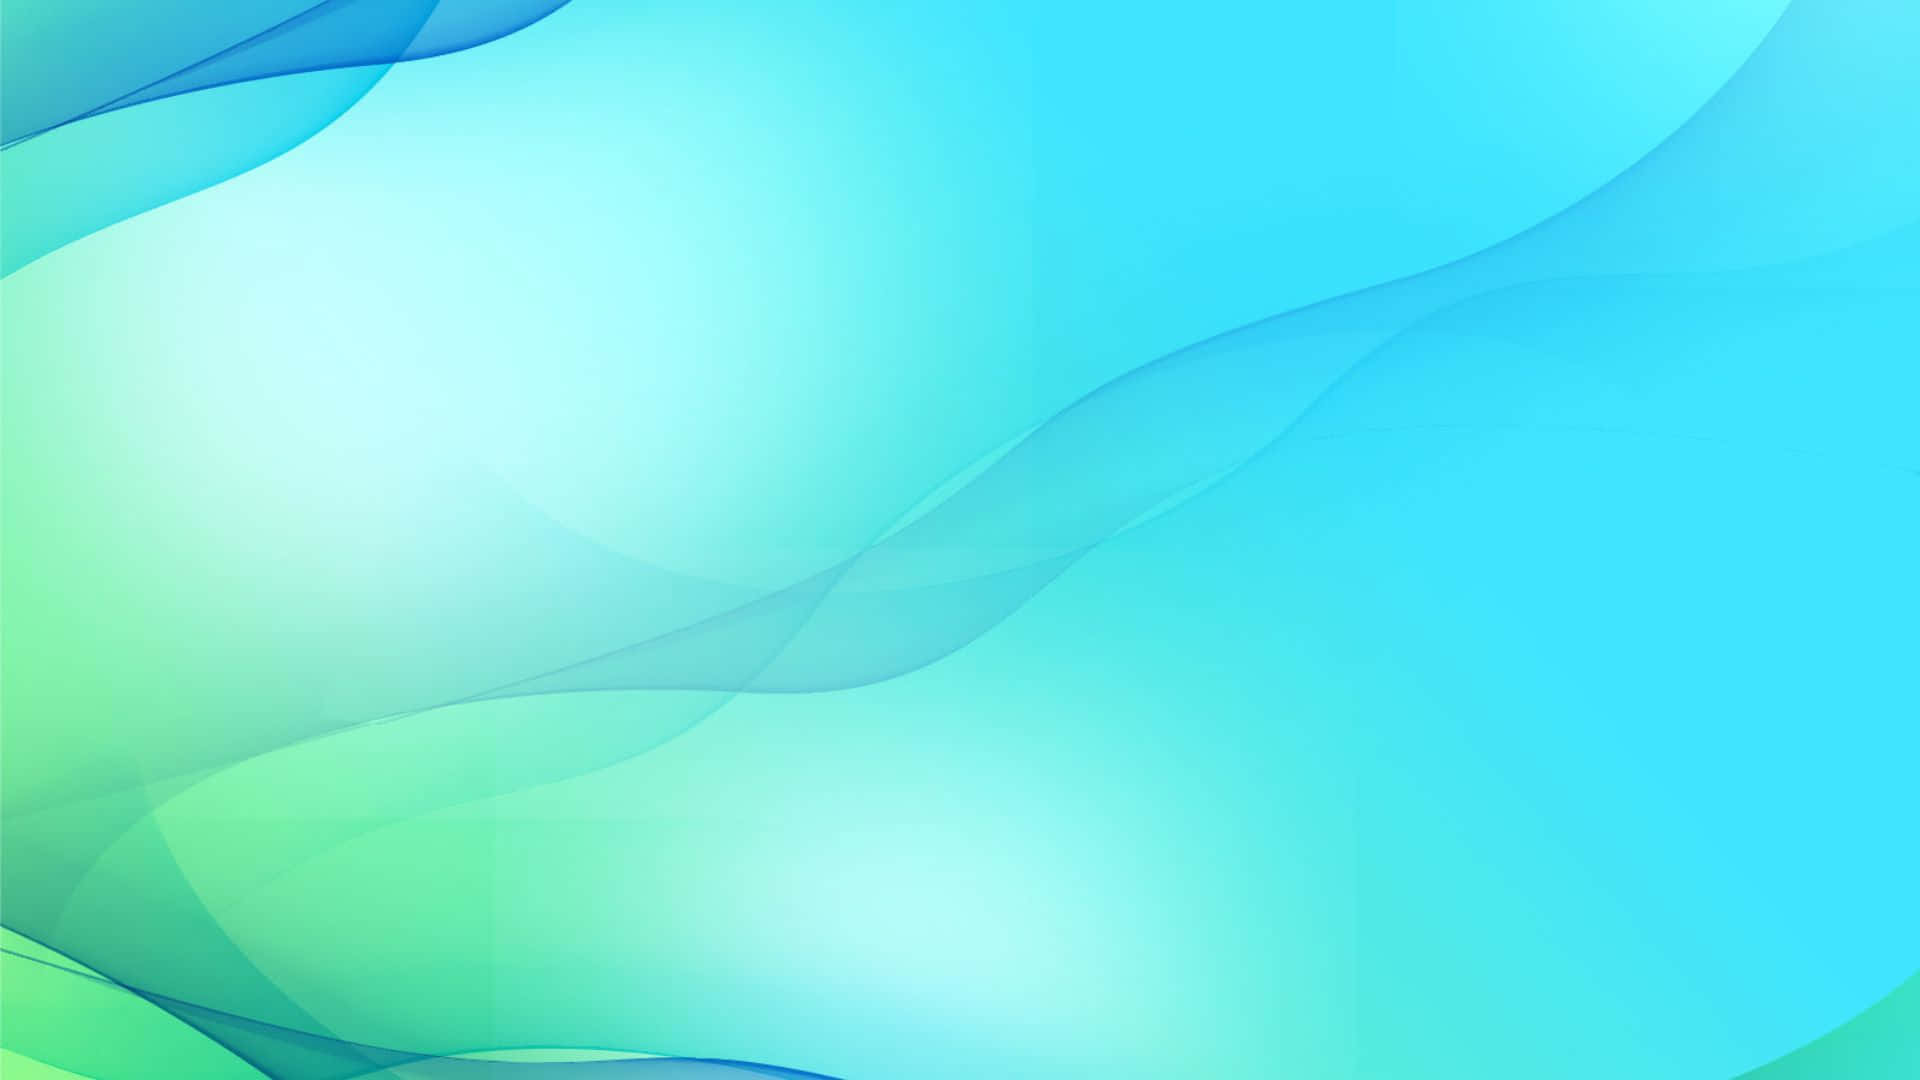 powerpoint backgrounds blue and green